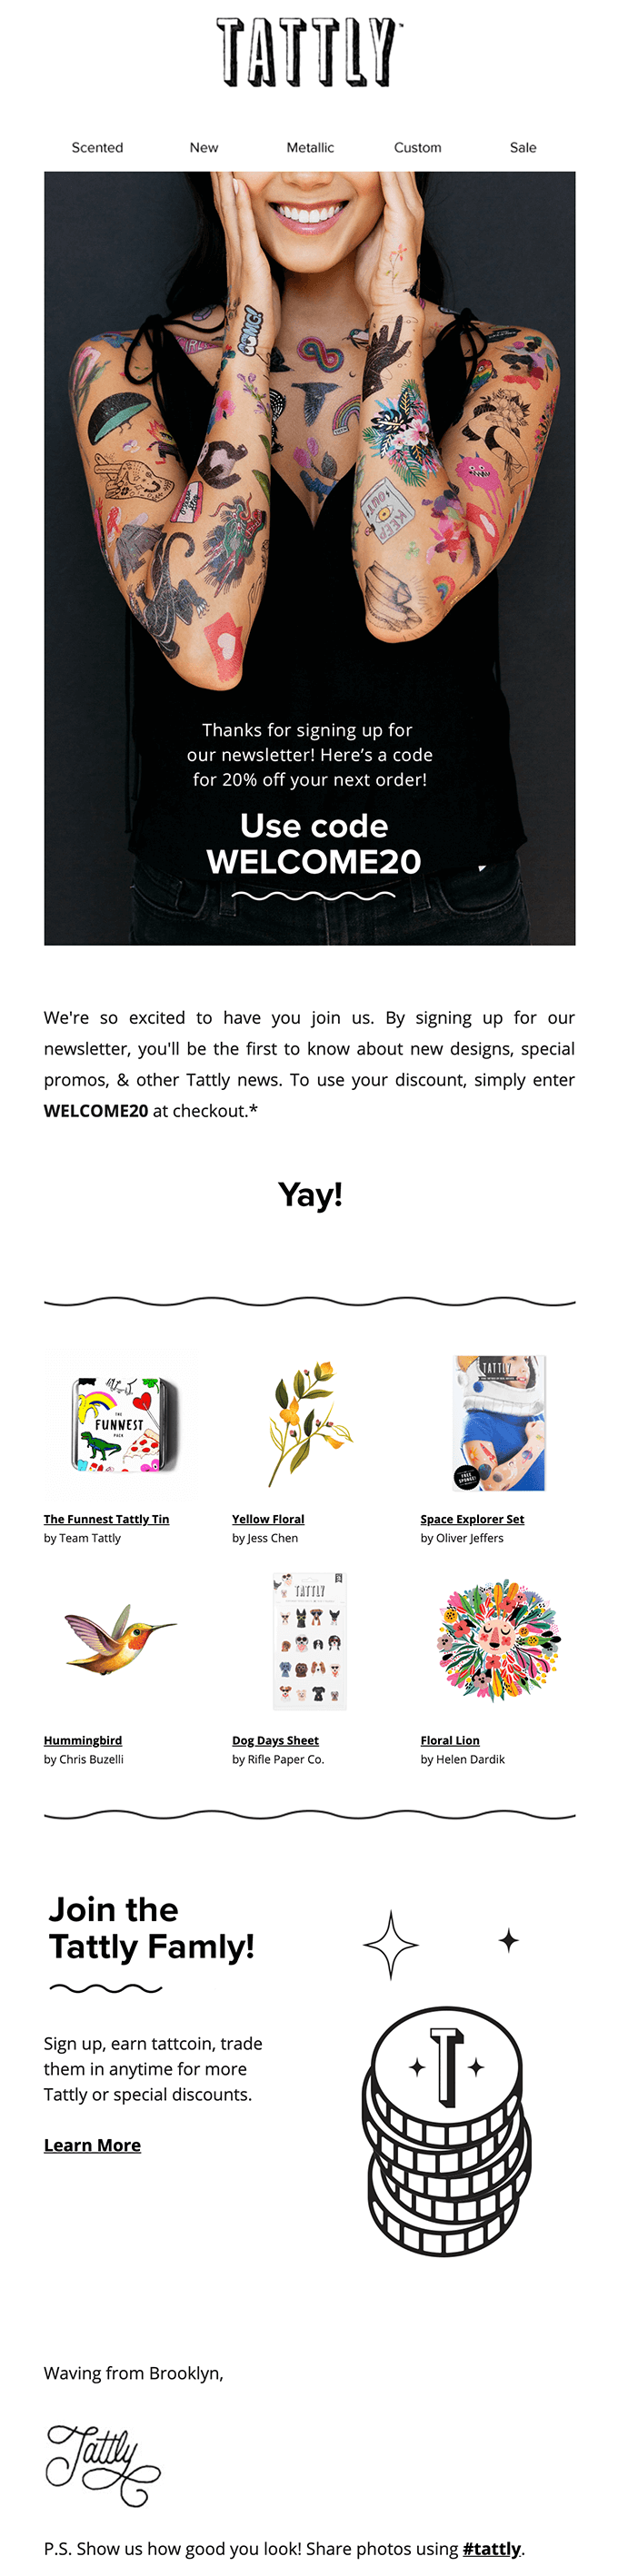 Tattly welcome email.